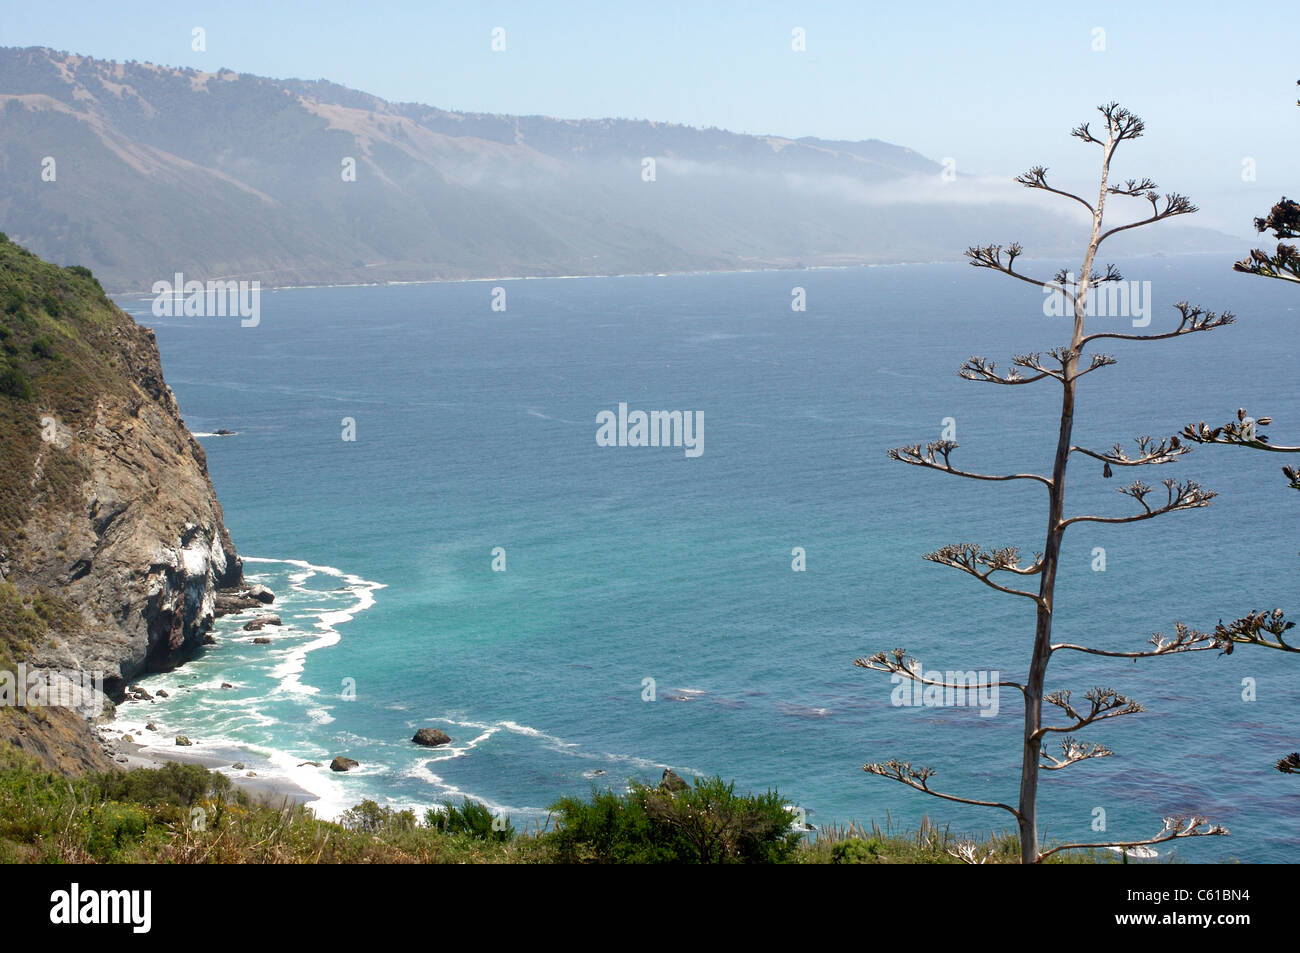 View of the Pacific Ocean from Lucia, California, along highway 1 Stock Photo